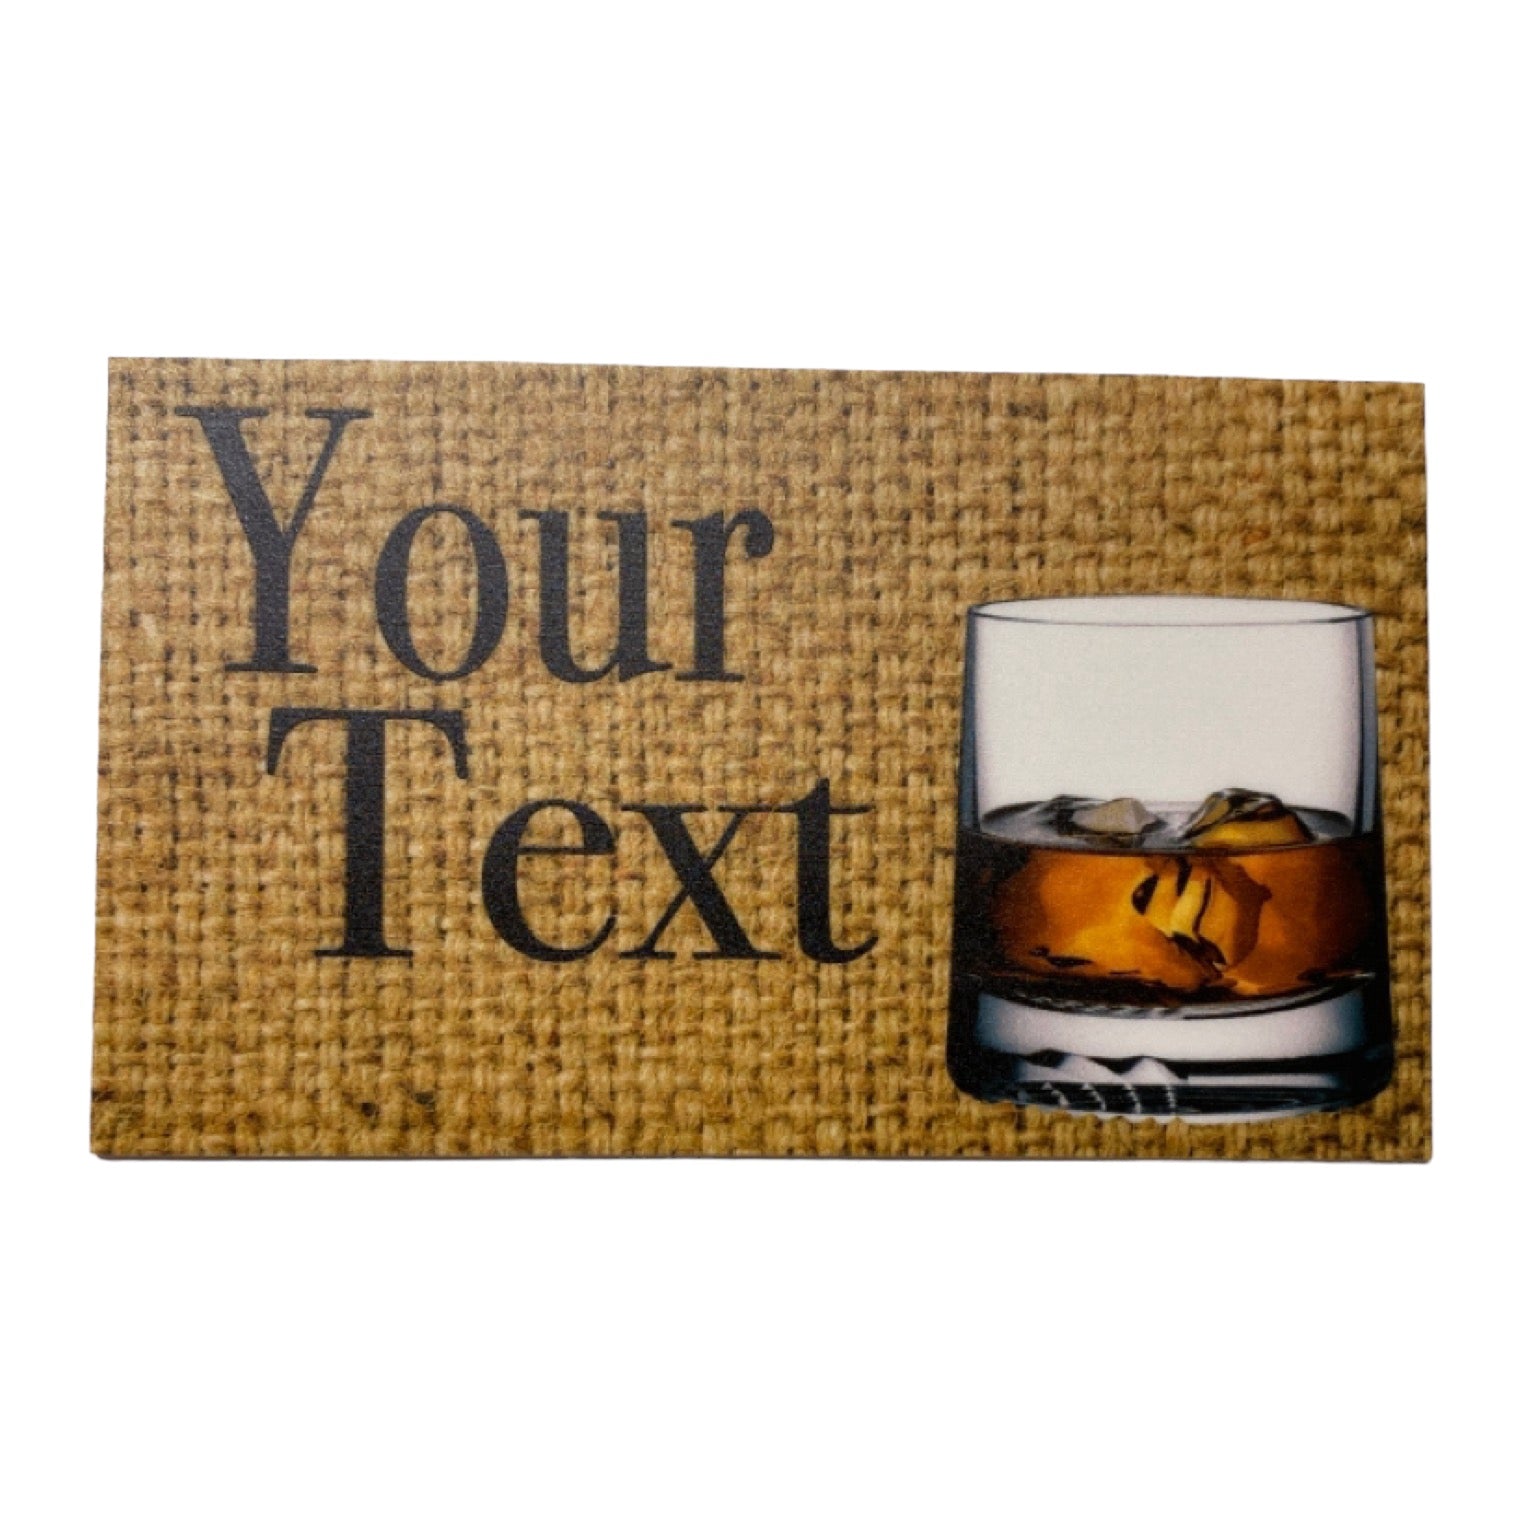 Scotch Lovers Bar Vintage Custom Sign - The Renmy Store Homewares & Gifts 